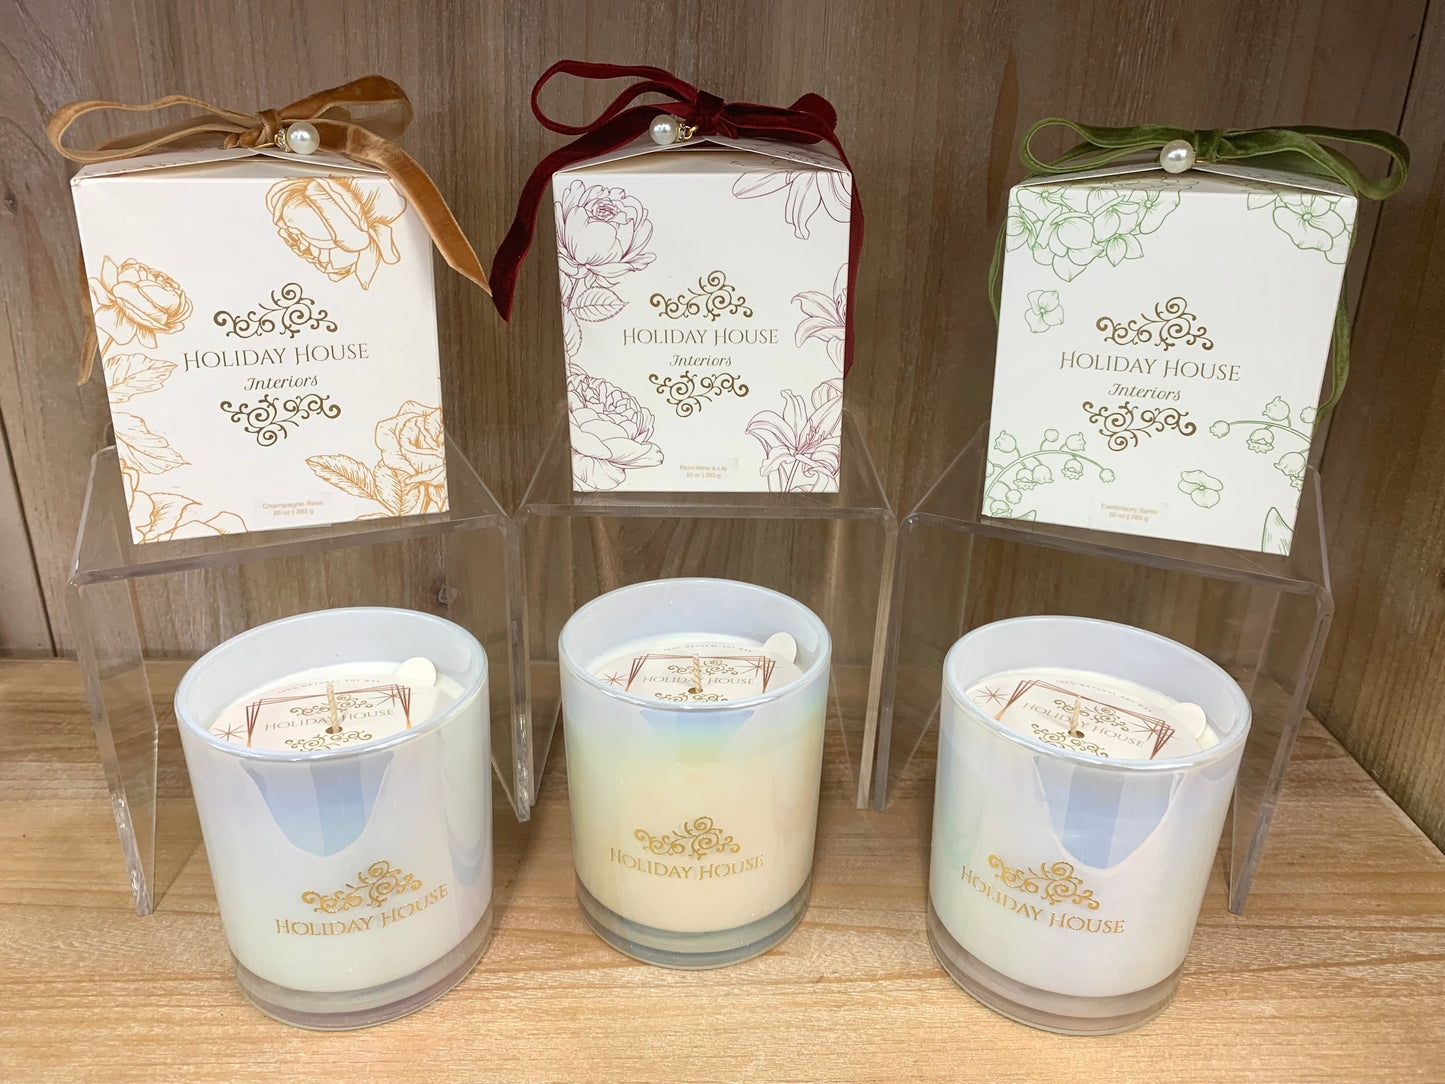 Floral Gift Boxed Candle - Plum Wine and Lily